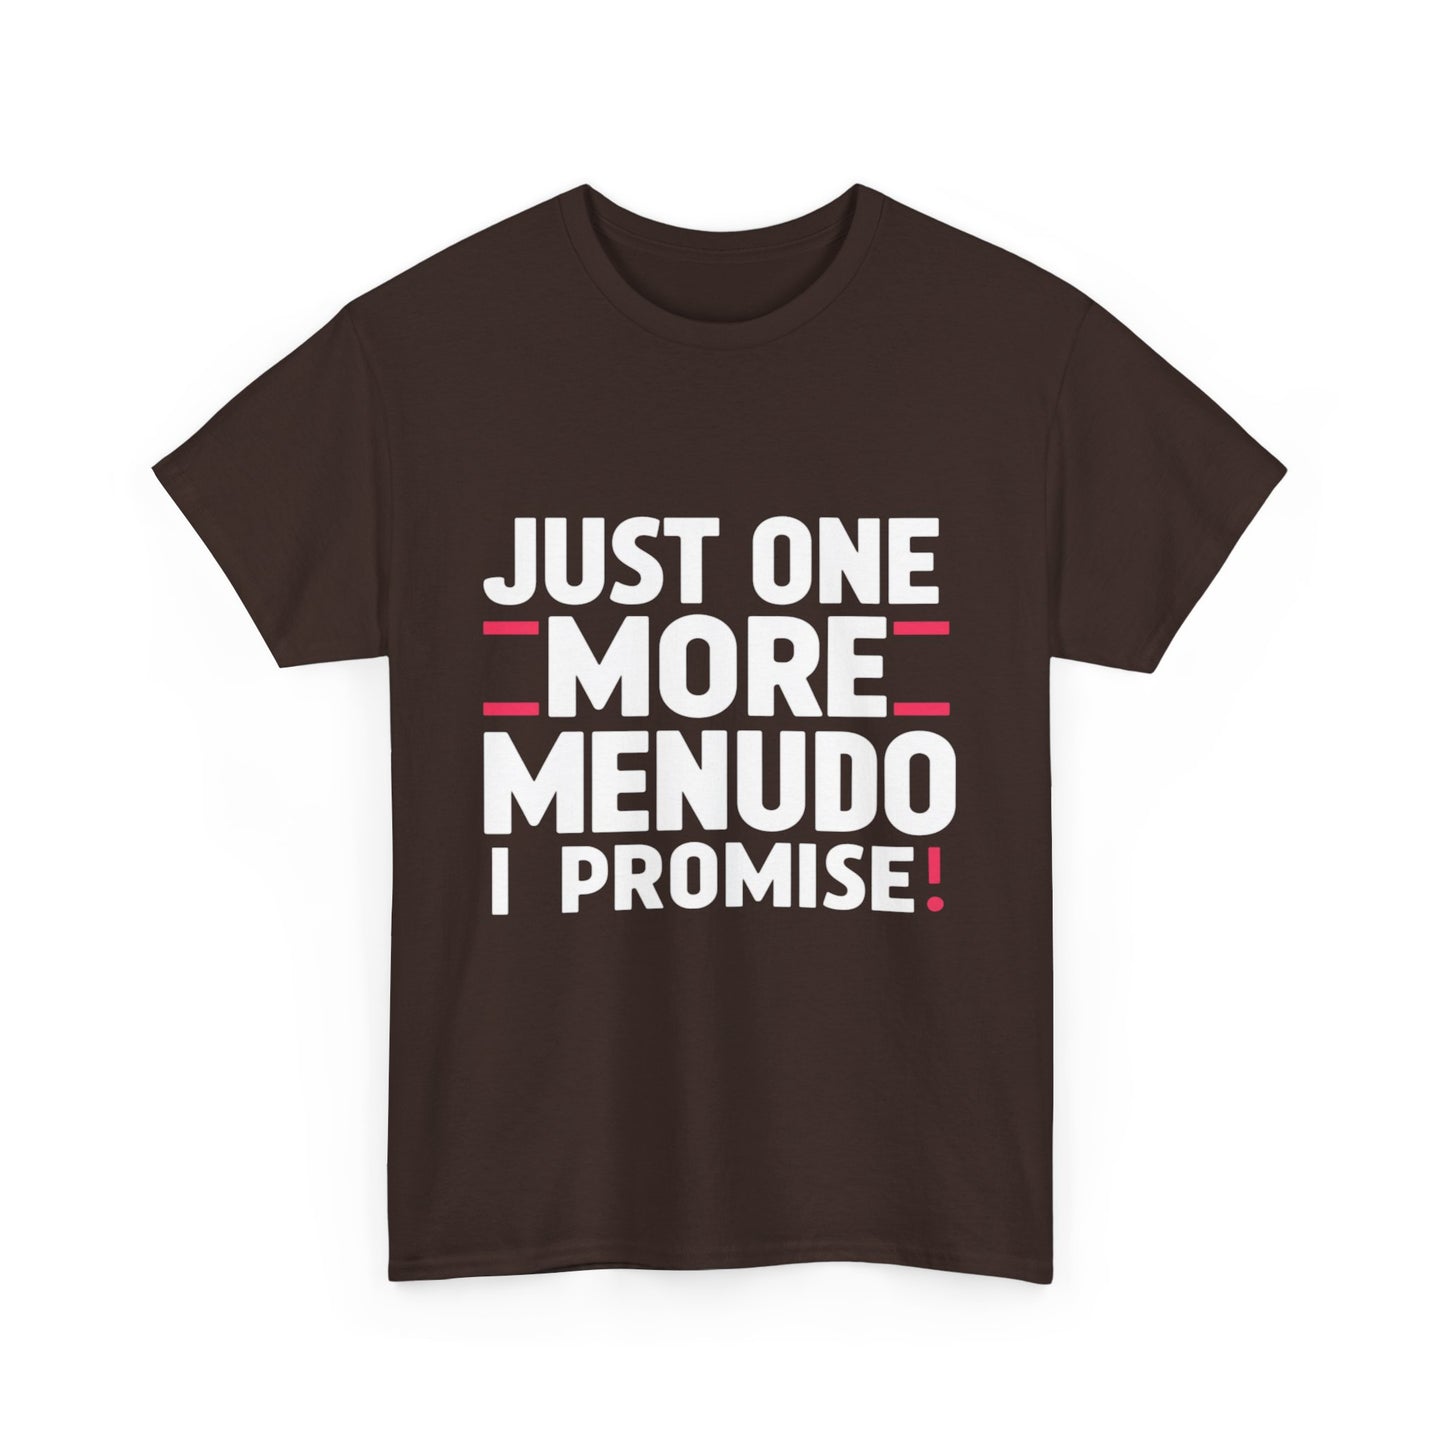 Just One More Menudo I Promise Mexican Food Graphic Unisex Heavy Cotton Tee Cotton Funny Humorous Graphic Soft Premium Unisex Men Women Dark Chocolate T-shirt Birthday Gift-21